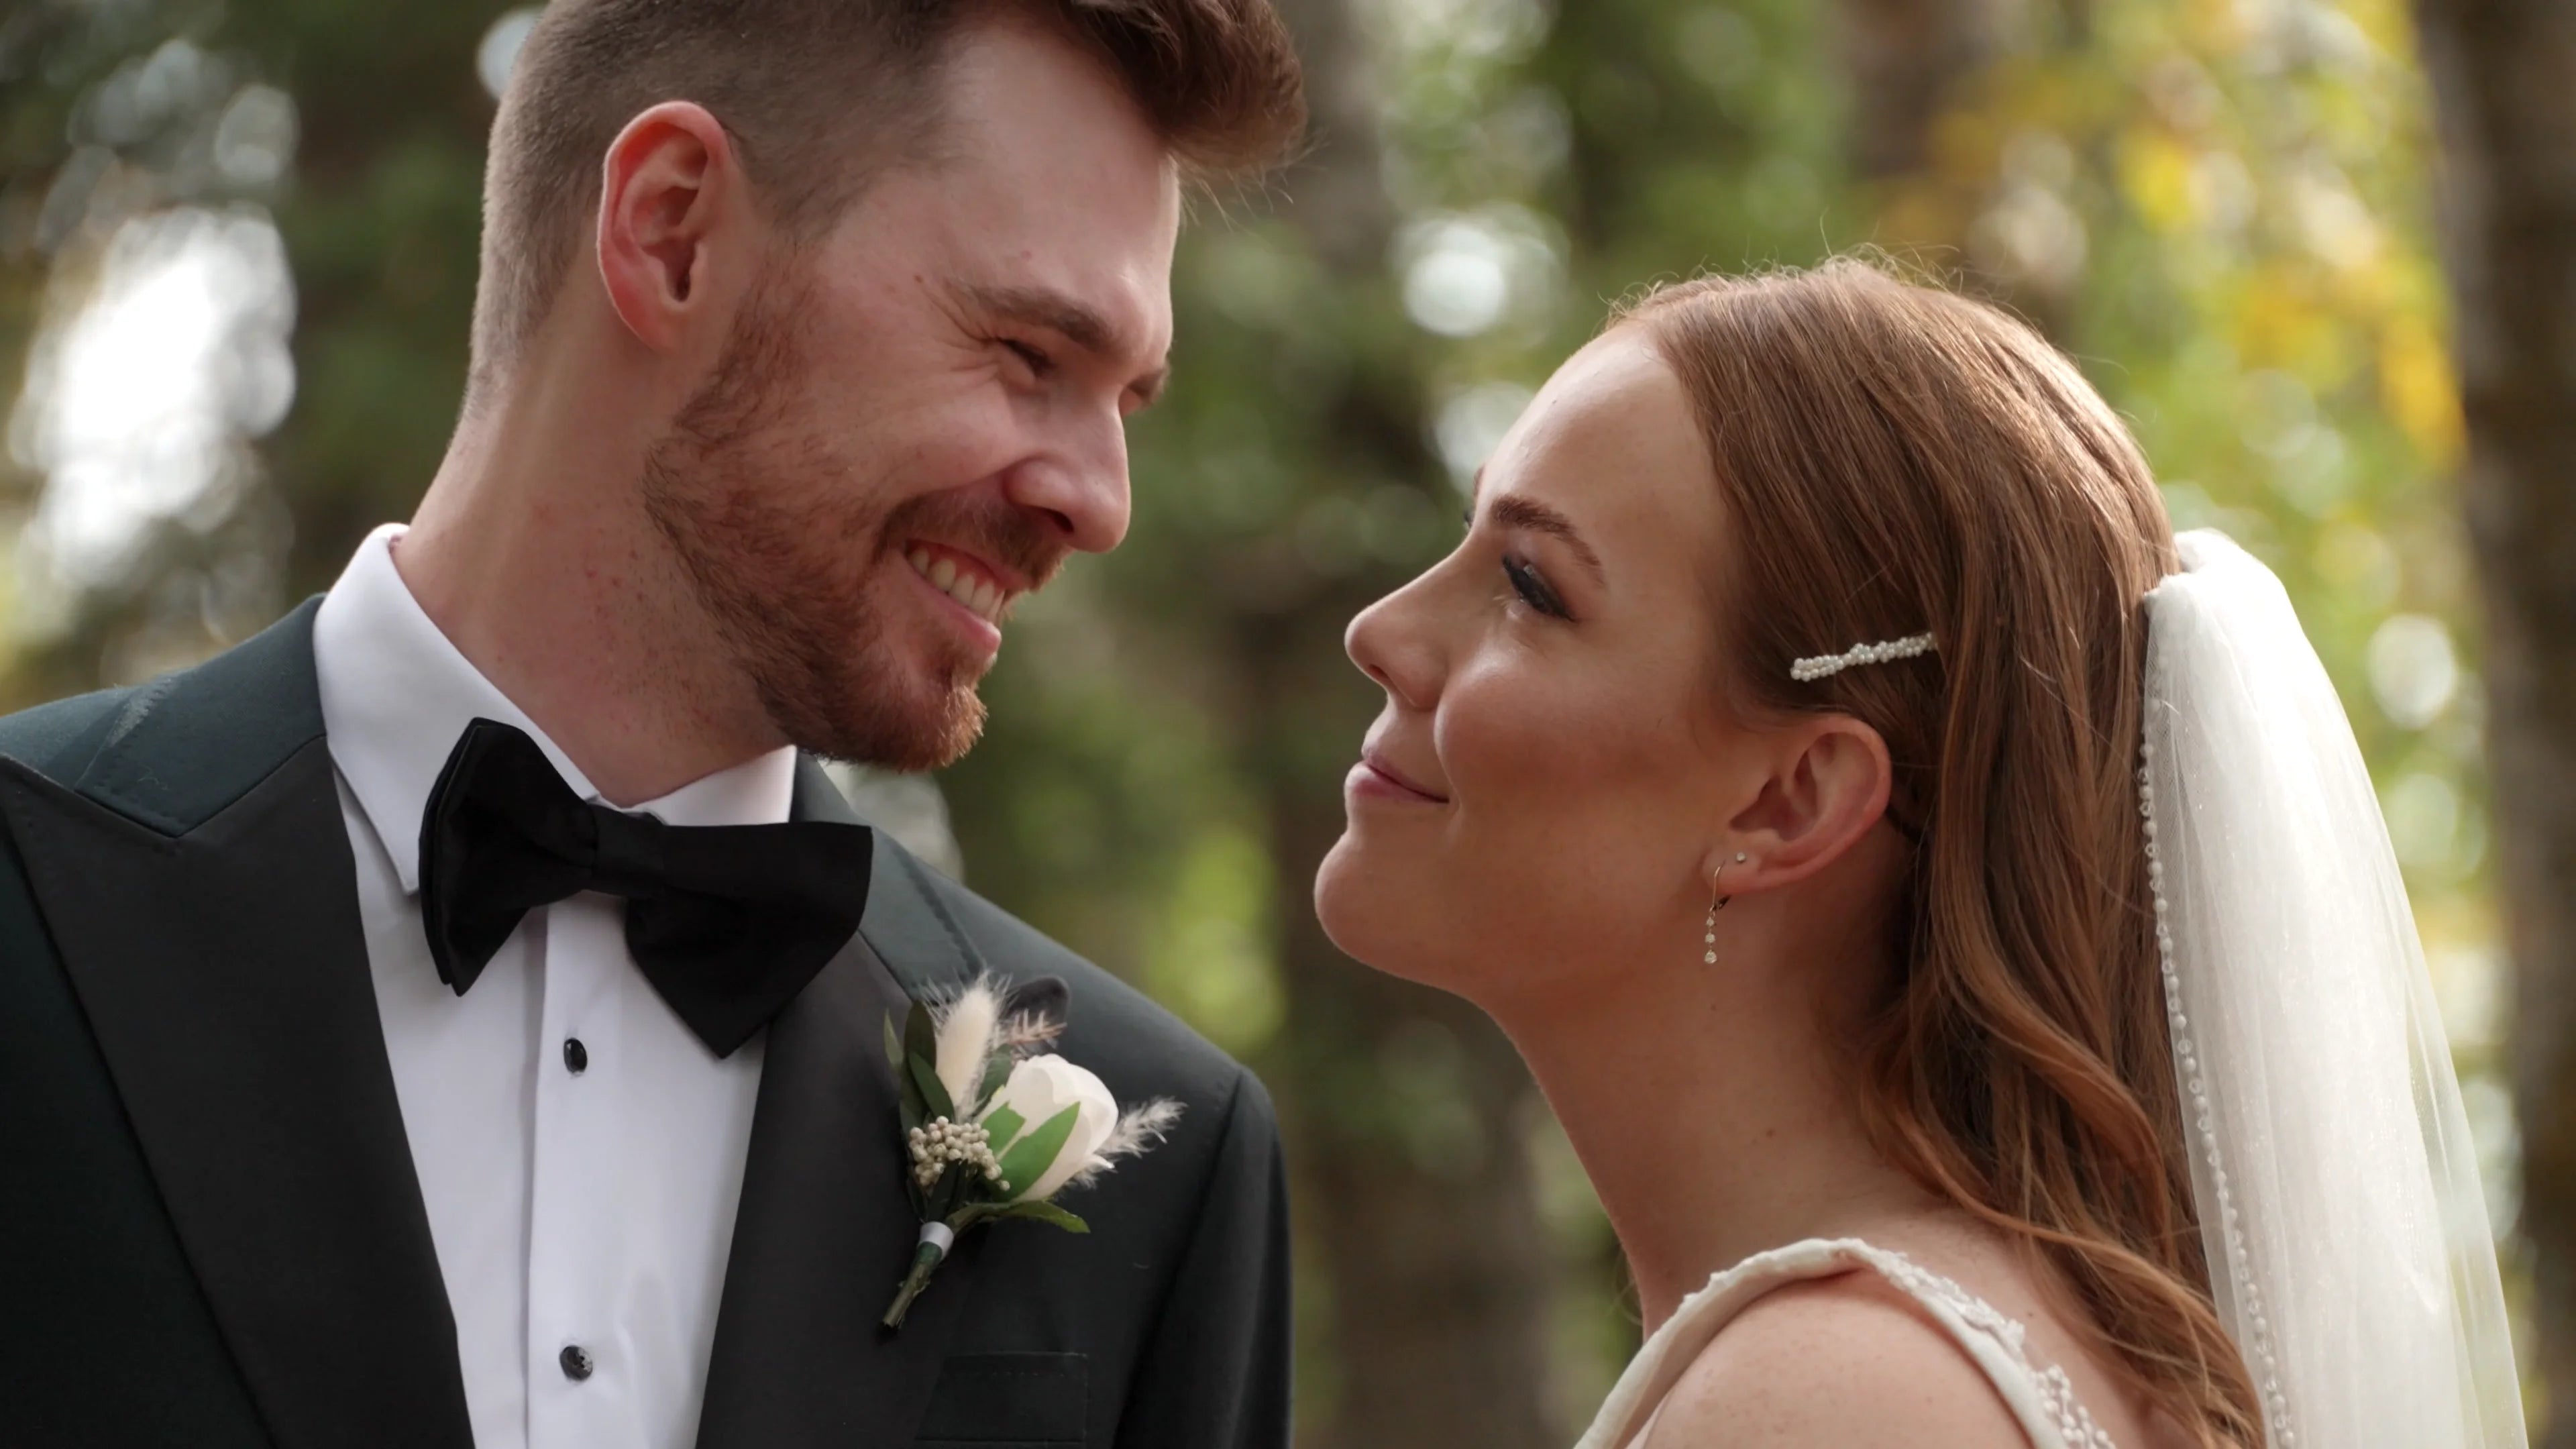 Load video: Sisko and Ruby Wedding Videography